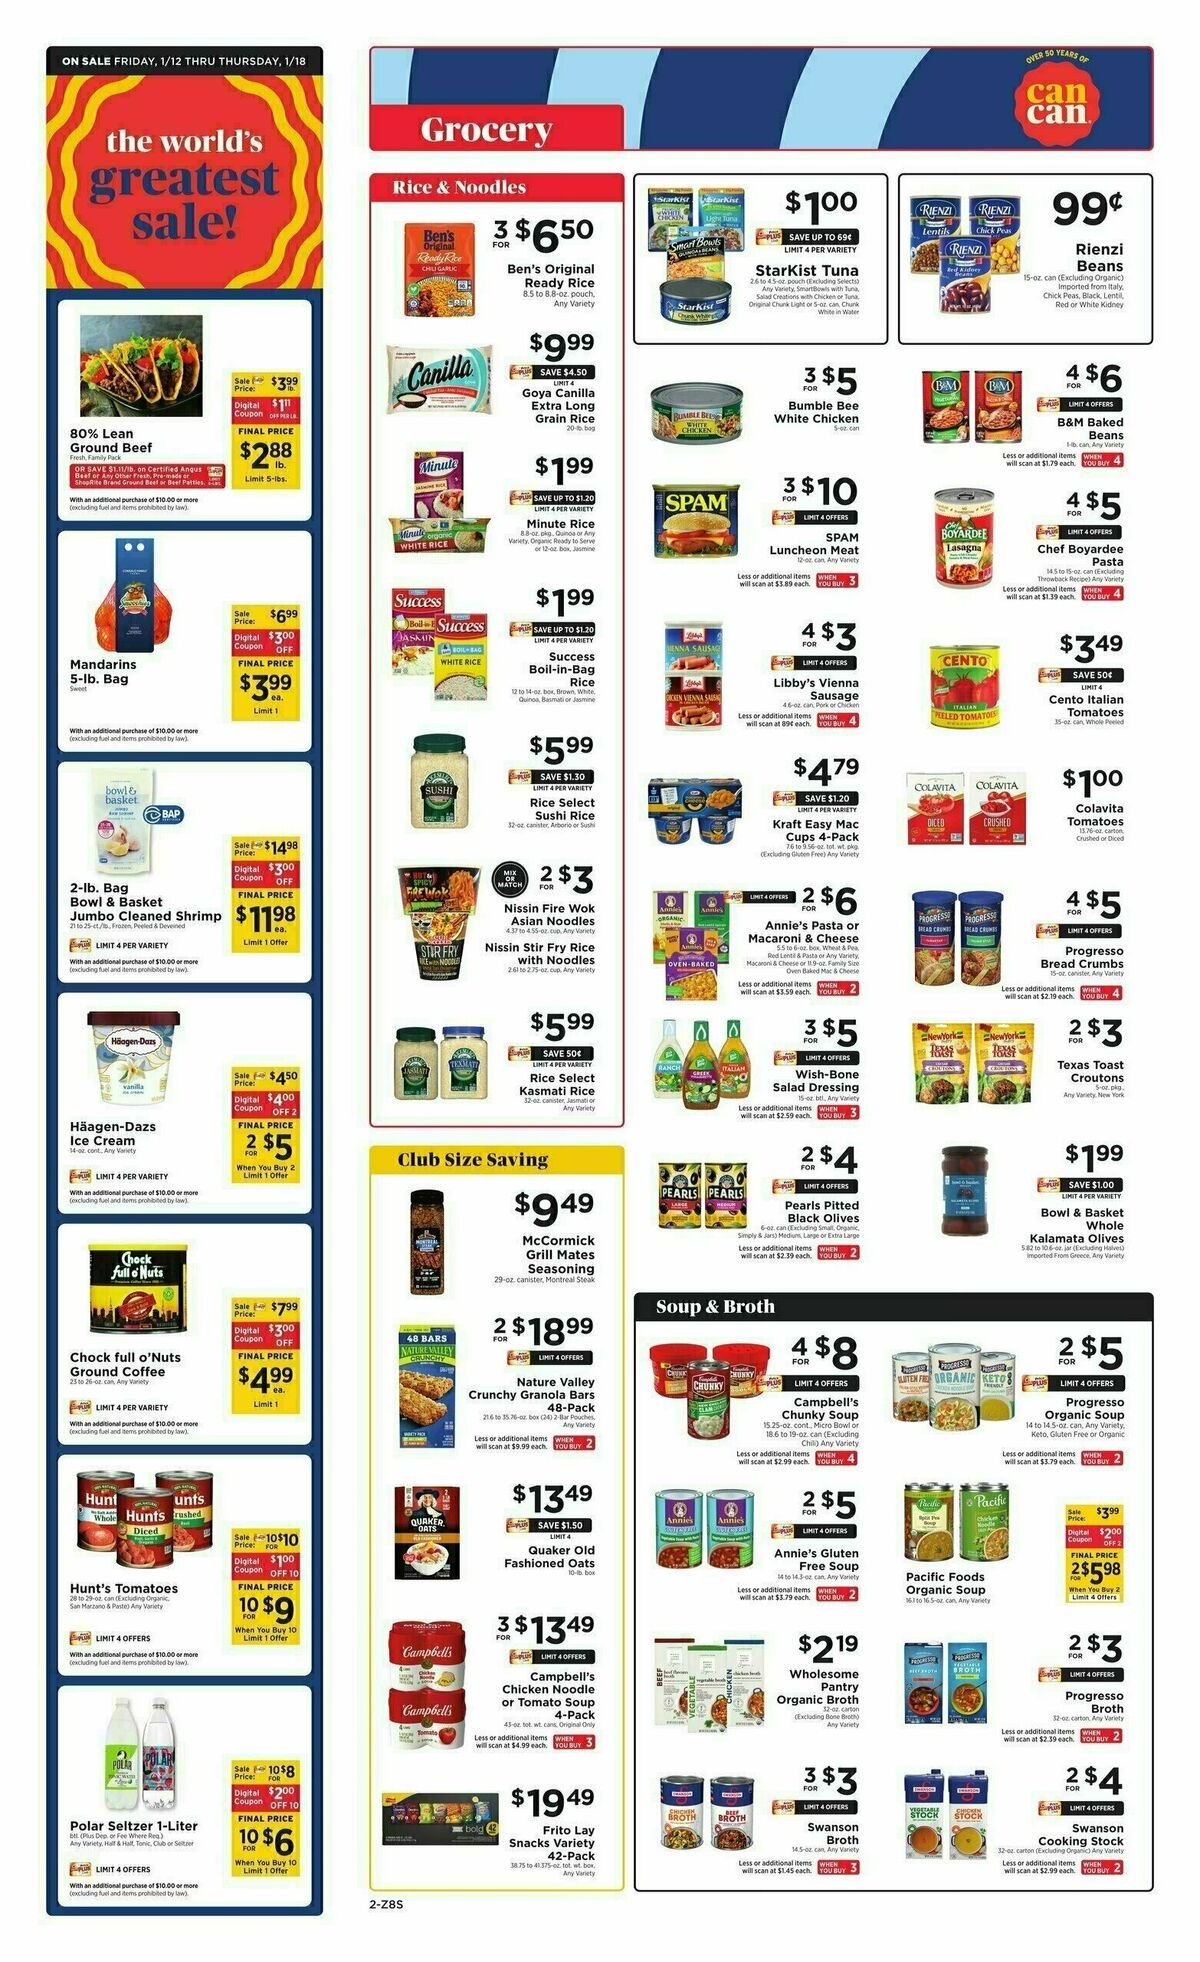 ShopRite Weekly Ad from January 12